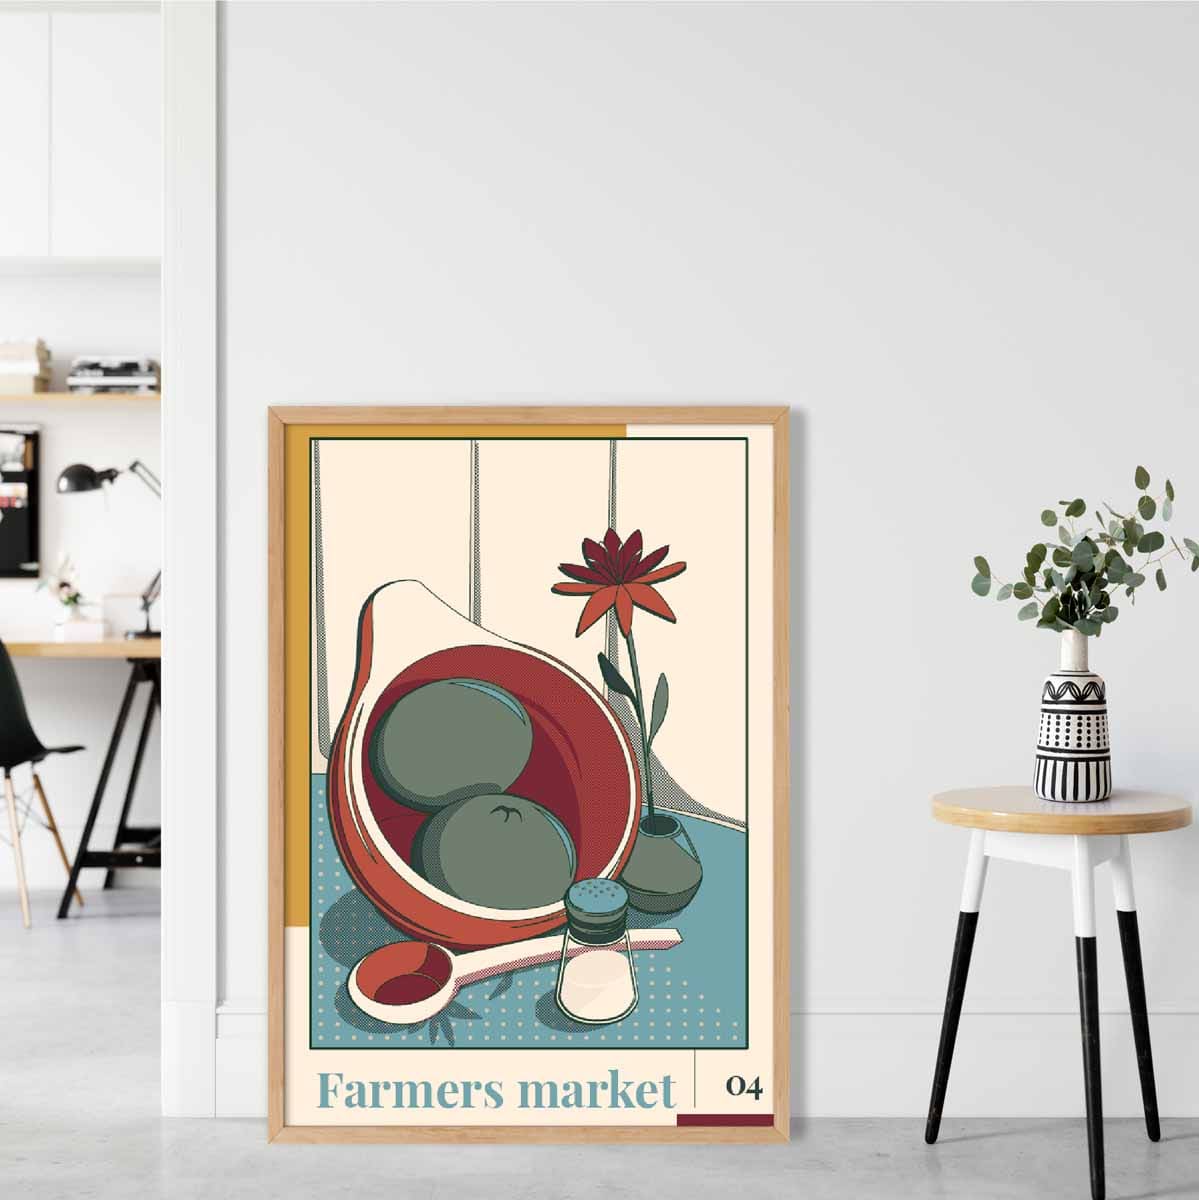 Farmers Market Poster No 4 in Damson Red and Blue